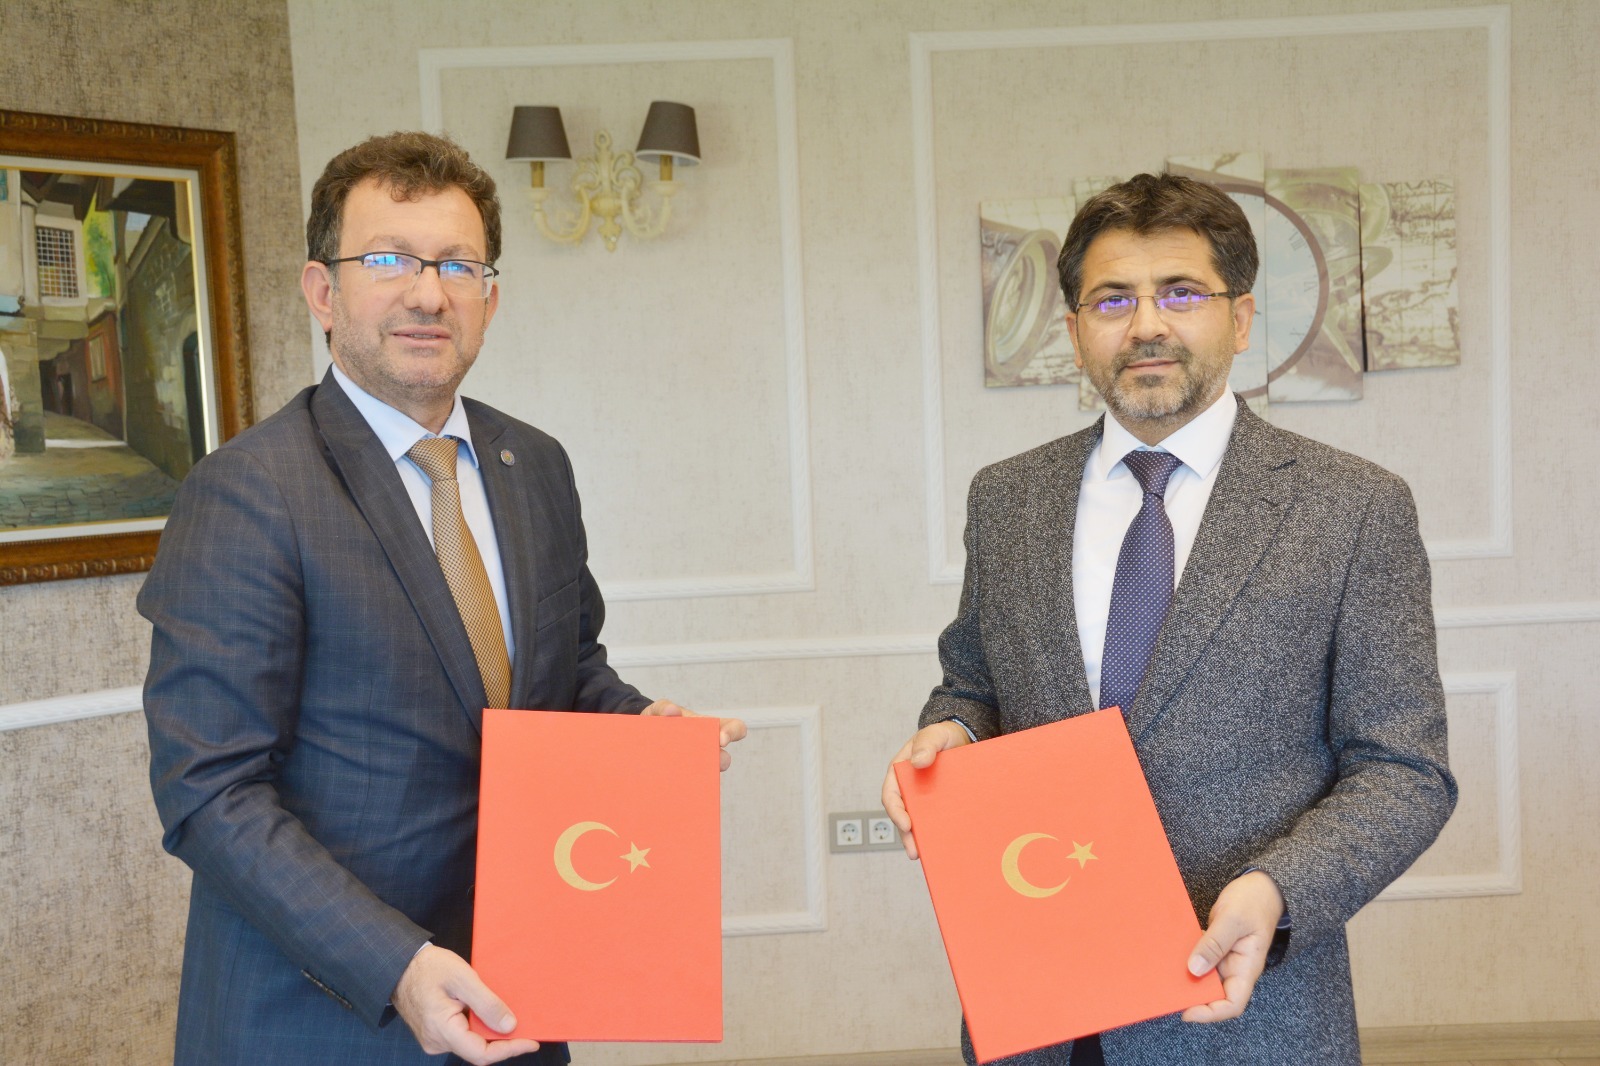 protocol-of-pedagogical-formation-education-signed-with-dicle-university